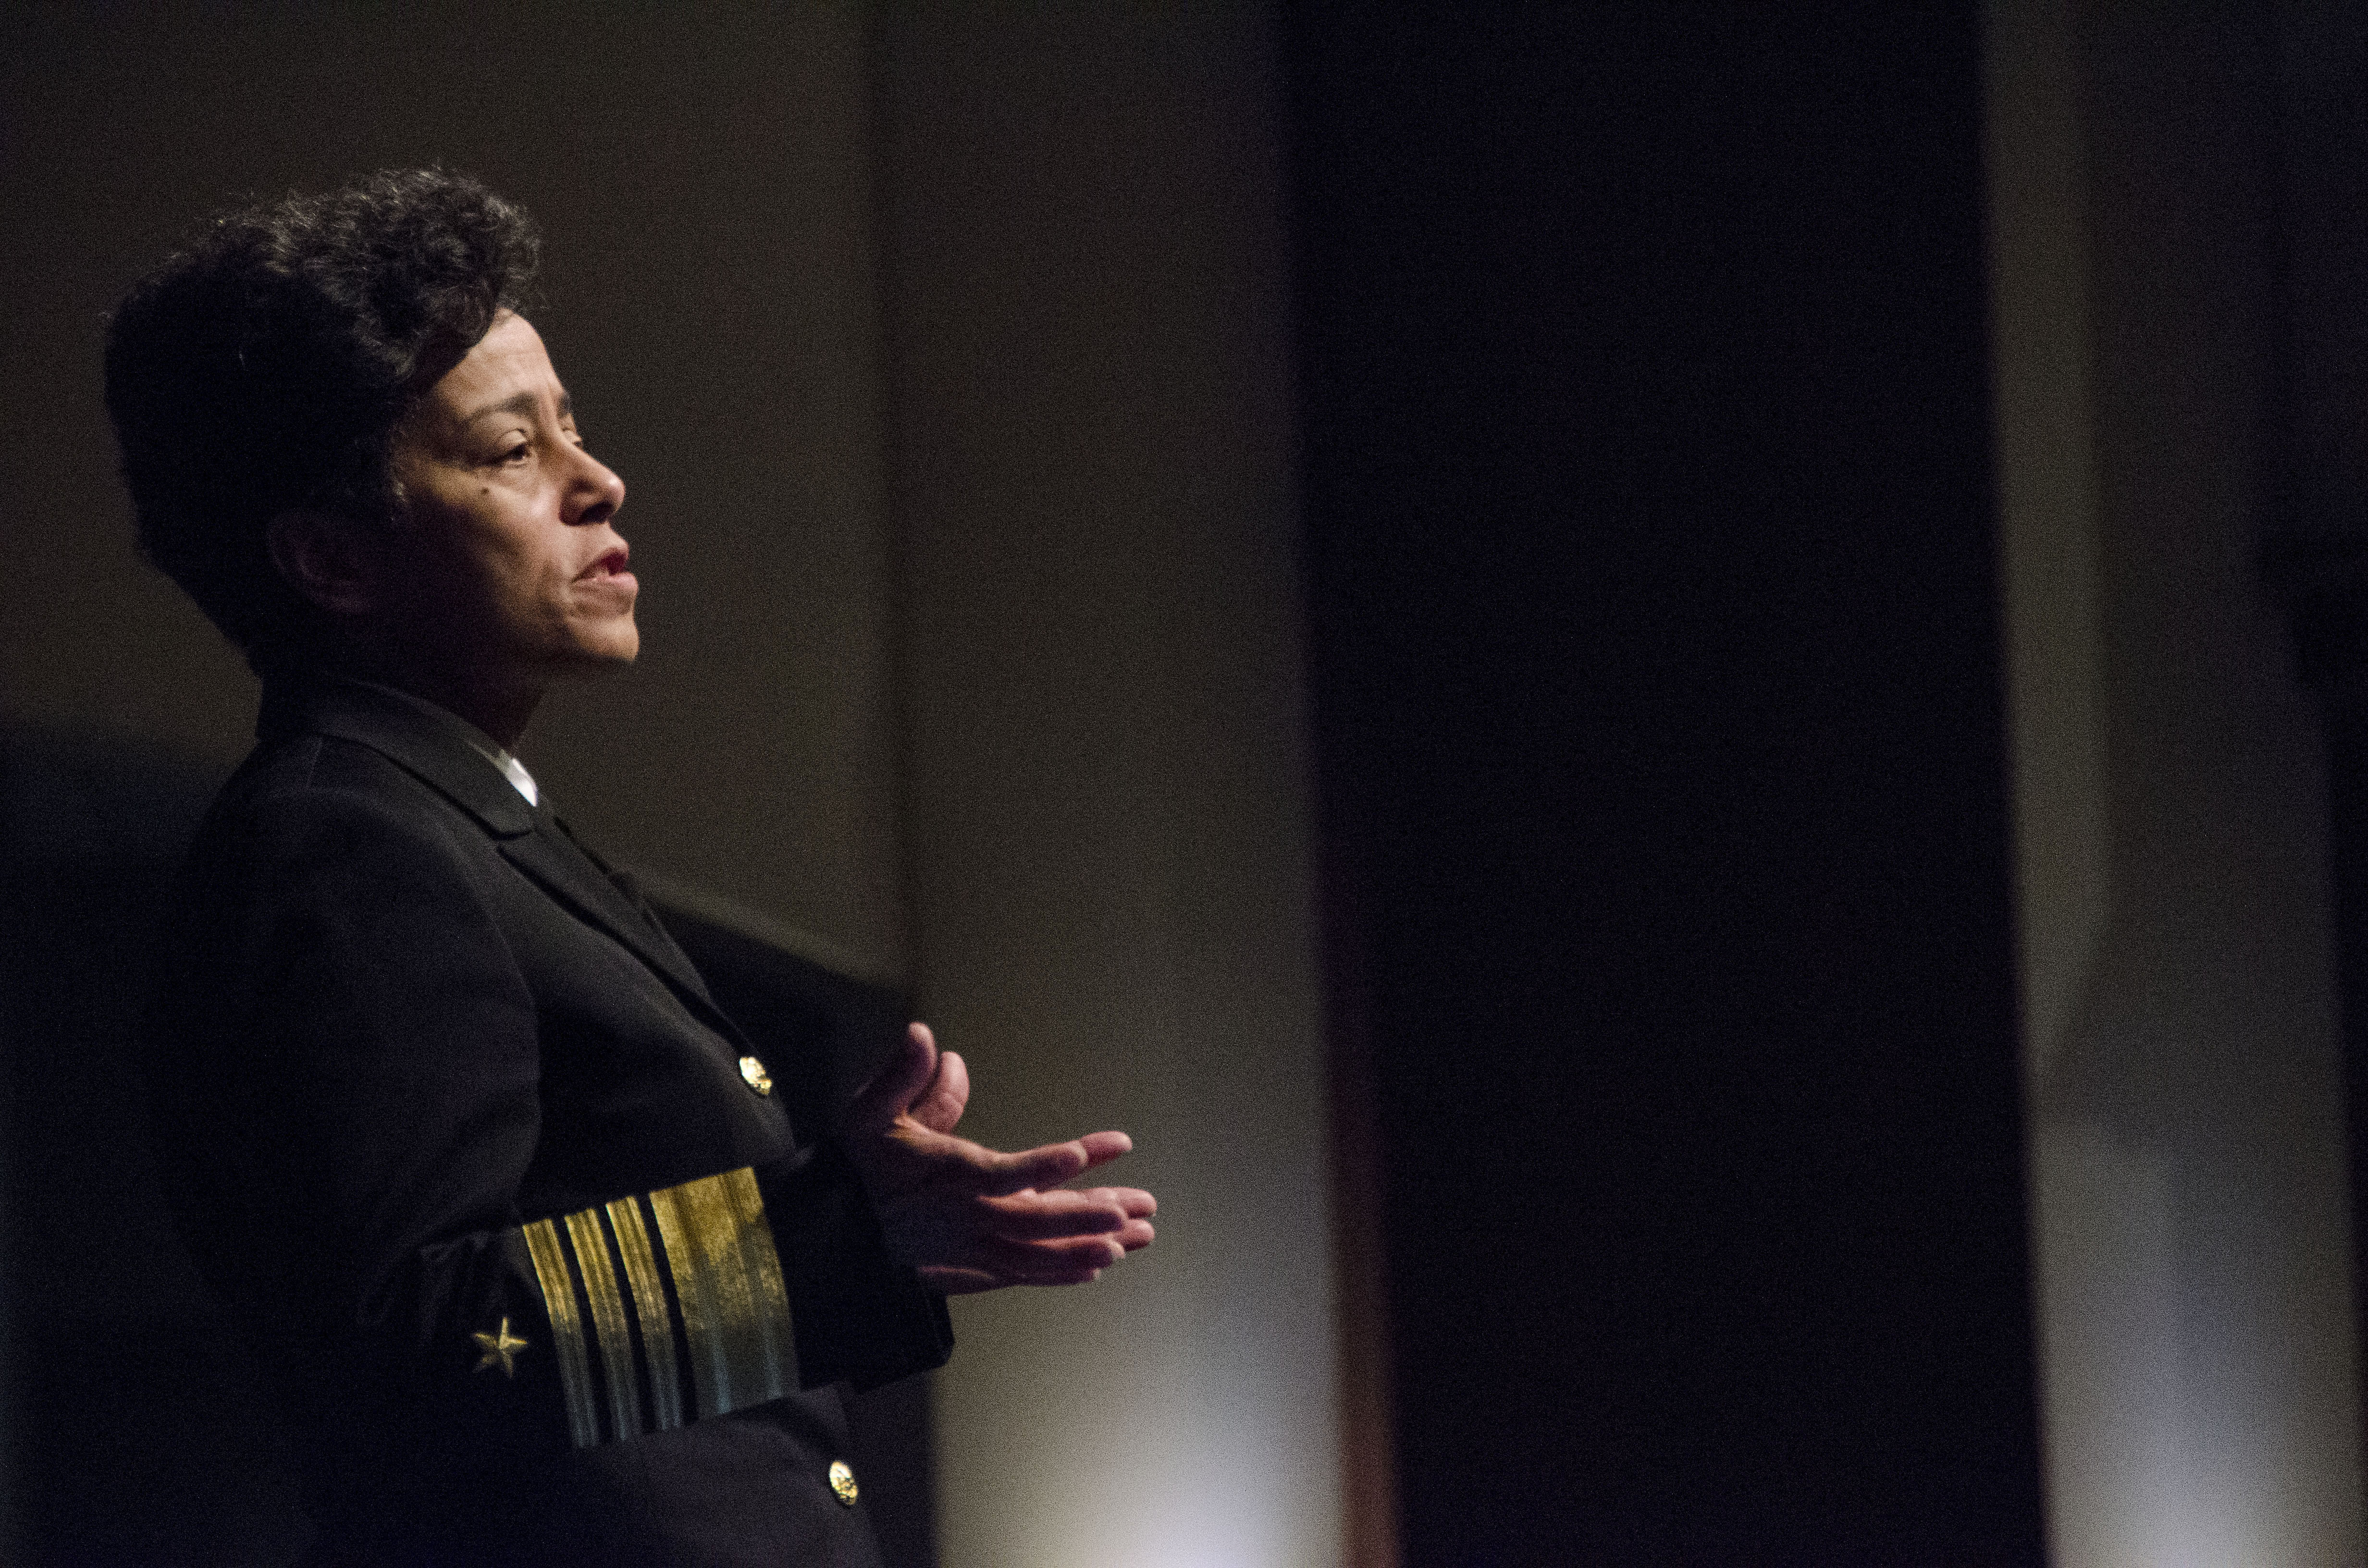 Vice Chief of Naval Operations (VCNO) Adm. Michelle Howard speaks to students and faculty at the U.S. Army Command and General Staff College (CGSC) in 2015. US Army Photo